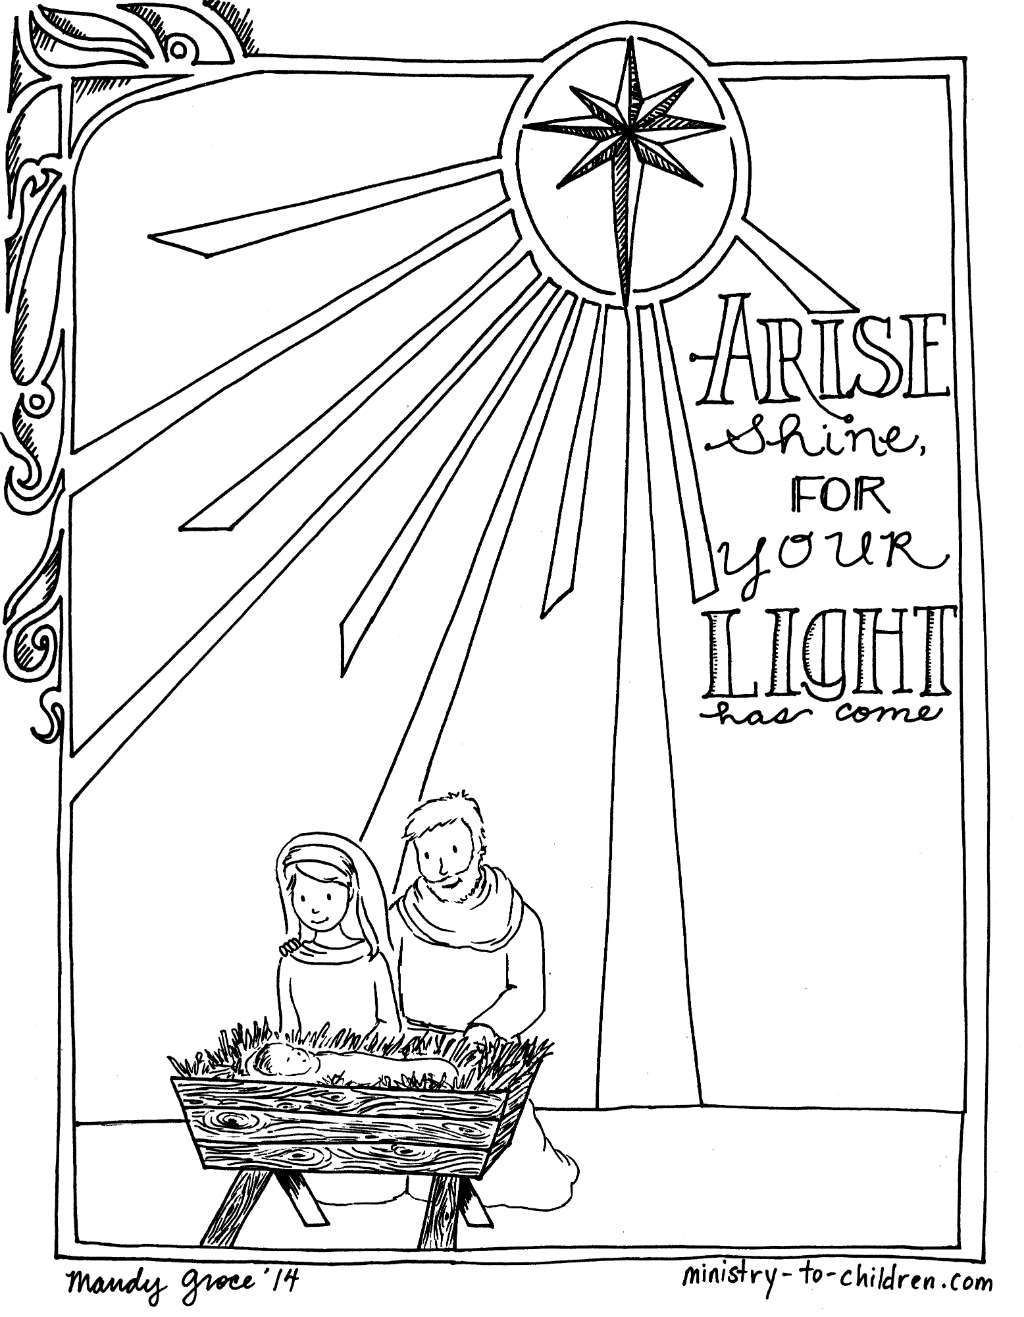 Nativity Coloring Pages Printable. 4 5. images about coloring